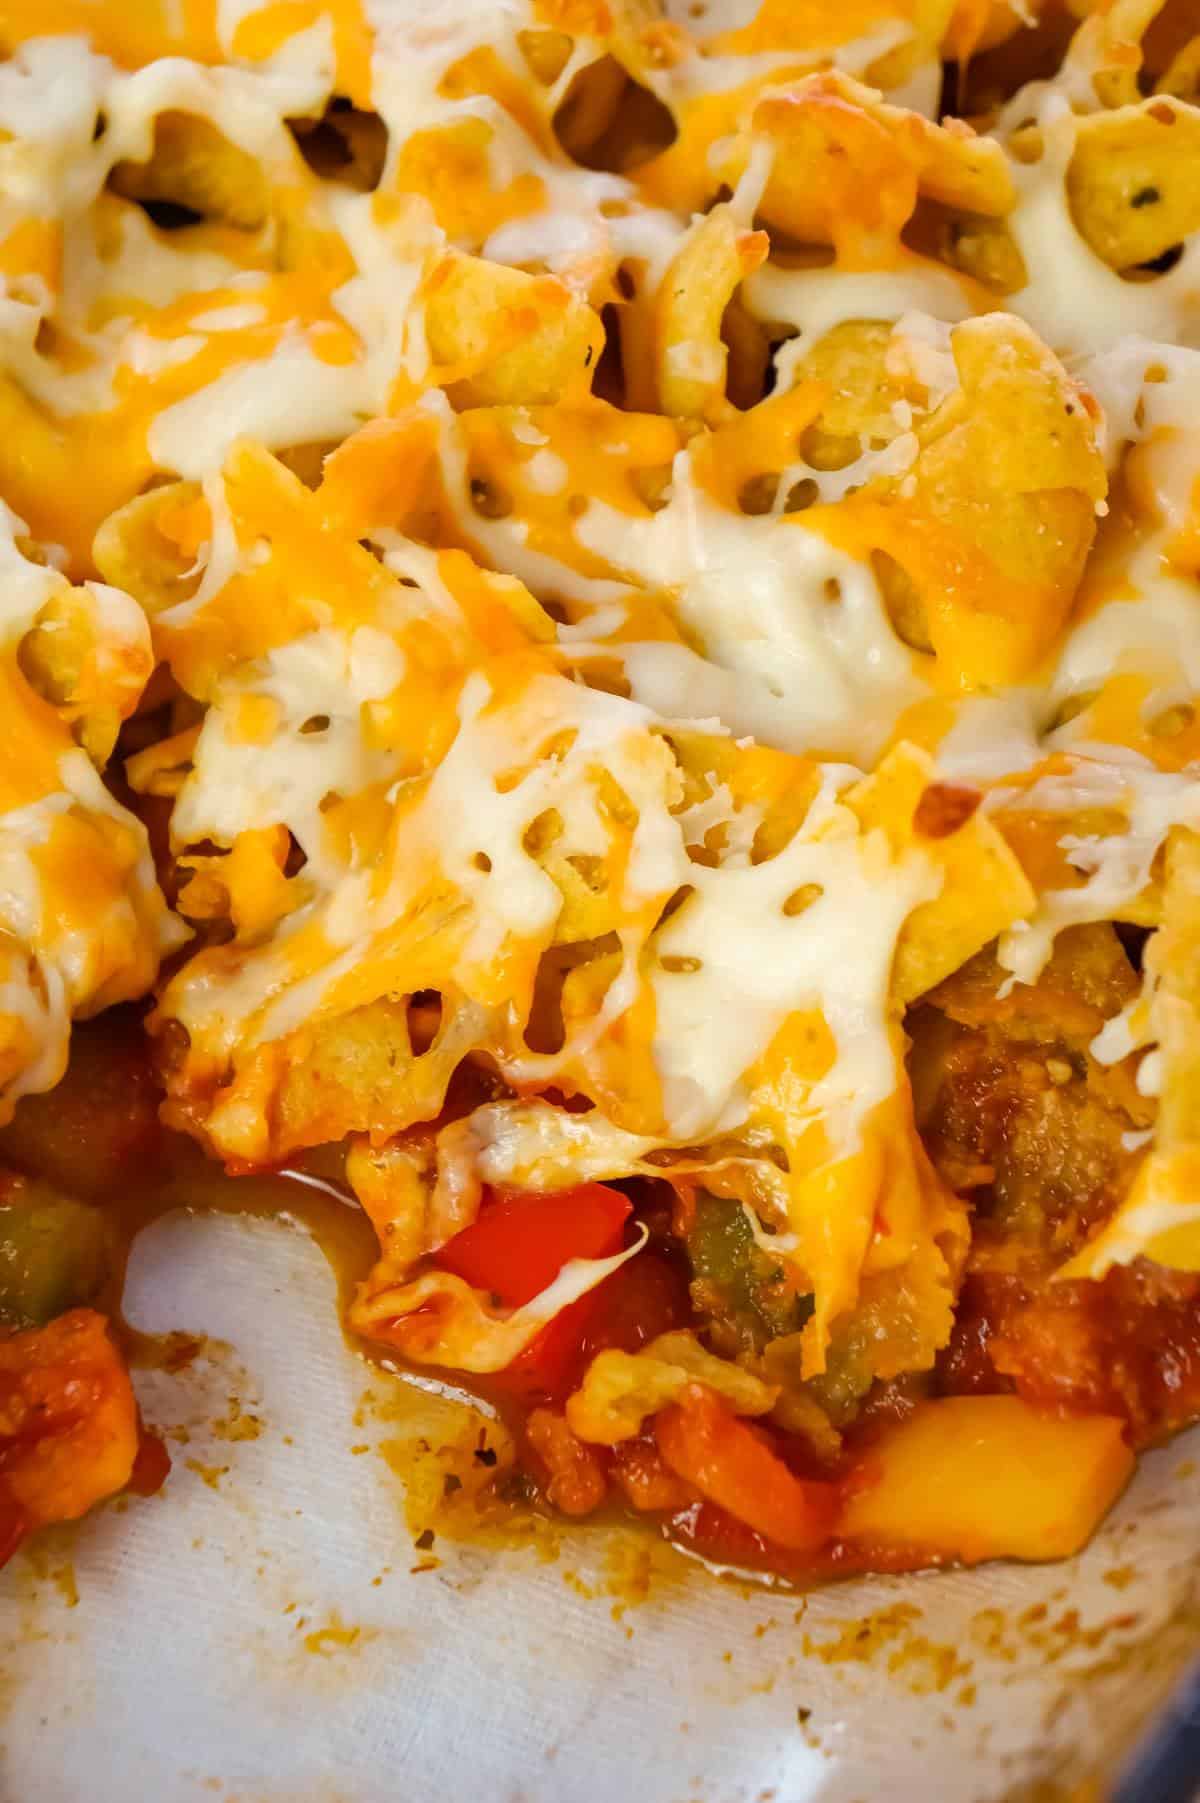 Sausage and Peppers Frito Pie is a delicious casserole recipe made with Italian pork sausage meat, onions and bell pepper tossed in a sweet and spicy tomato sauce and topped with Fritos corn chips and shredded cheese.